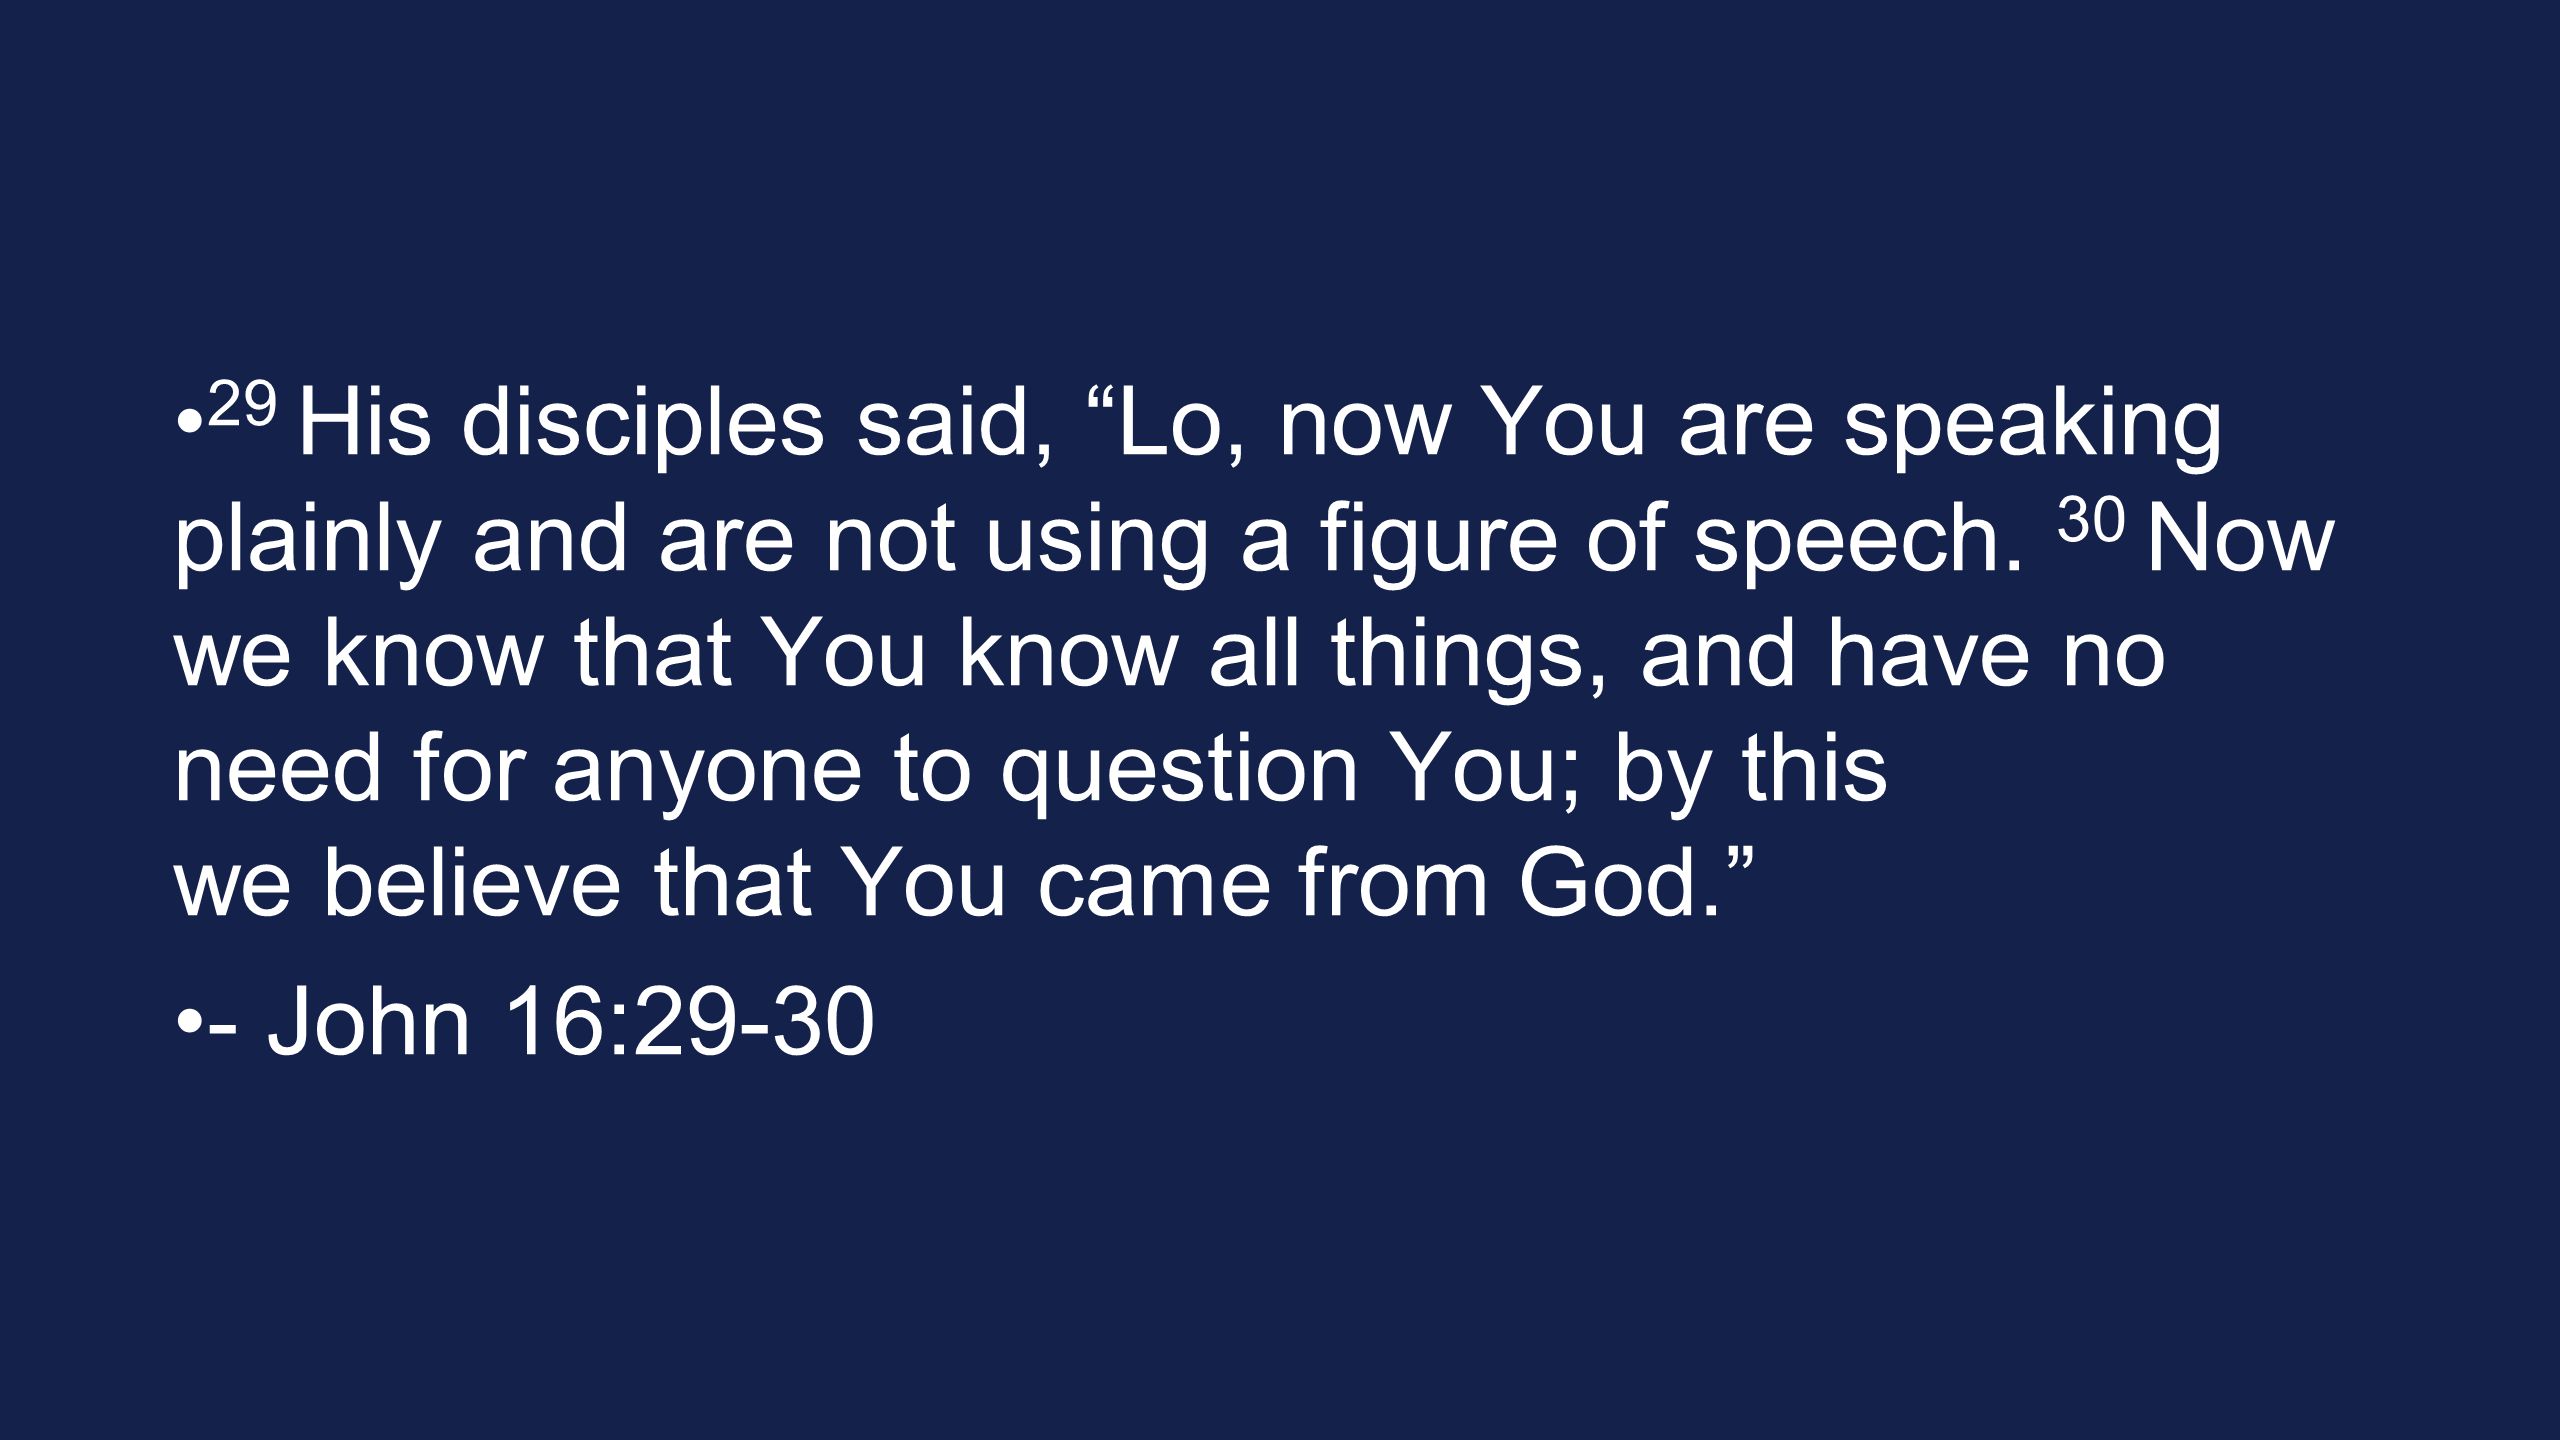 29 His disciples said, Lo, now You are speaking plainly and are not using a figure of speech.